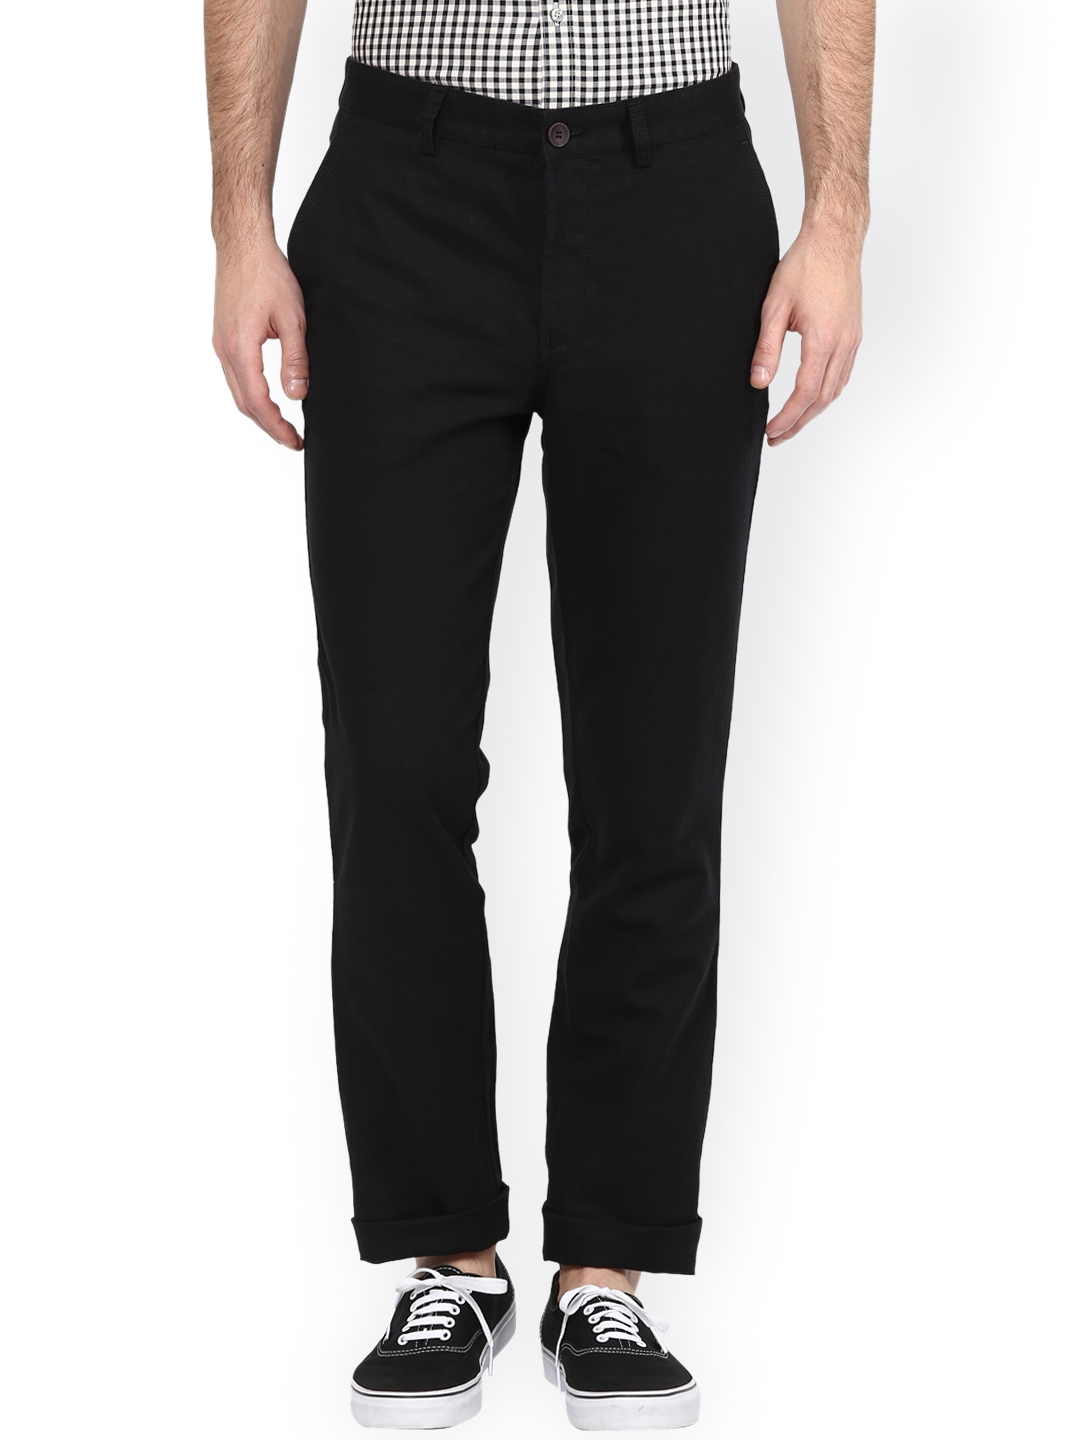 Buy Turtle Black Slim Fit Casual Trousers - Trousers for Men 951895 ...